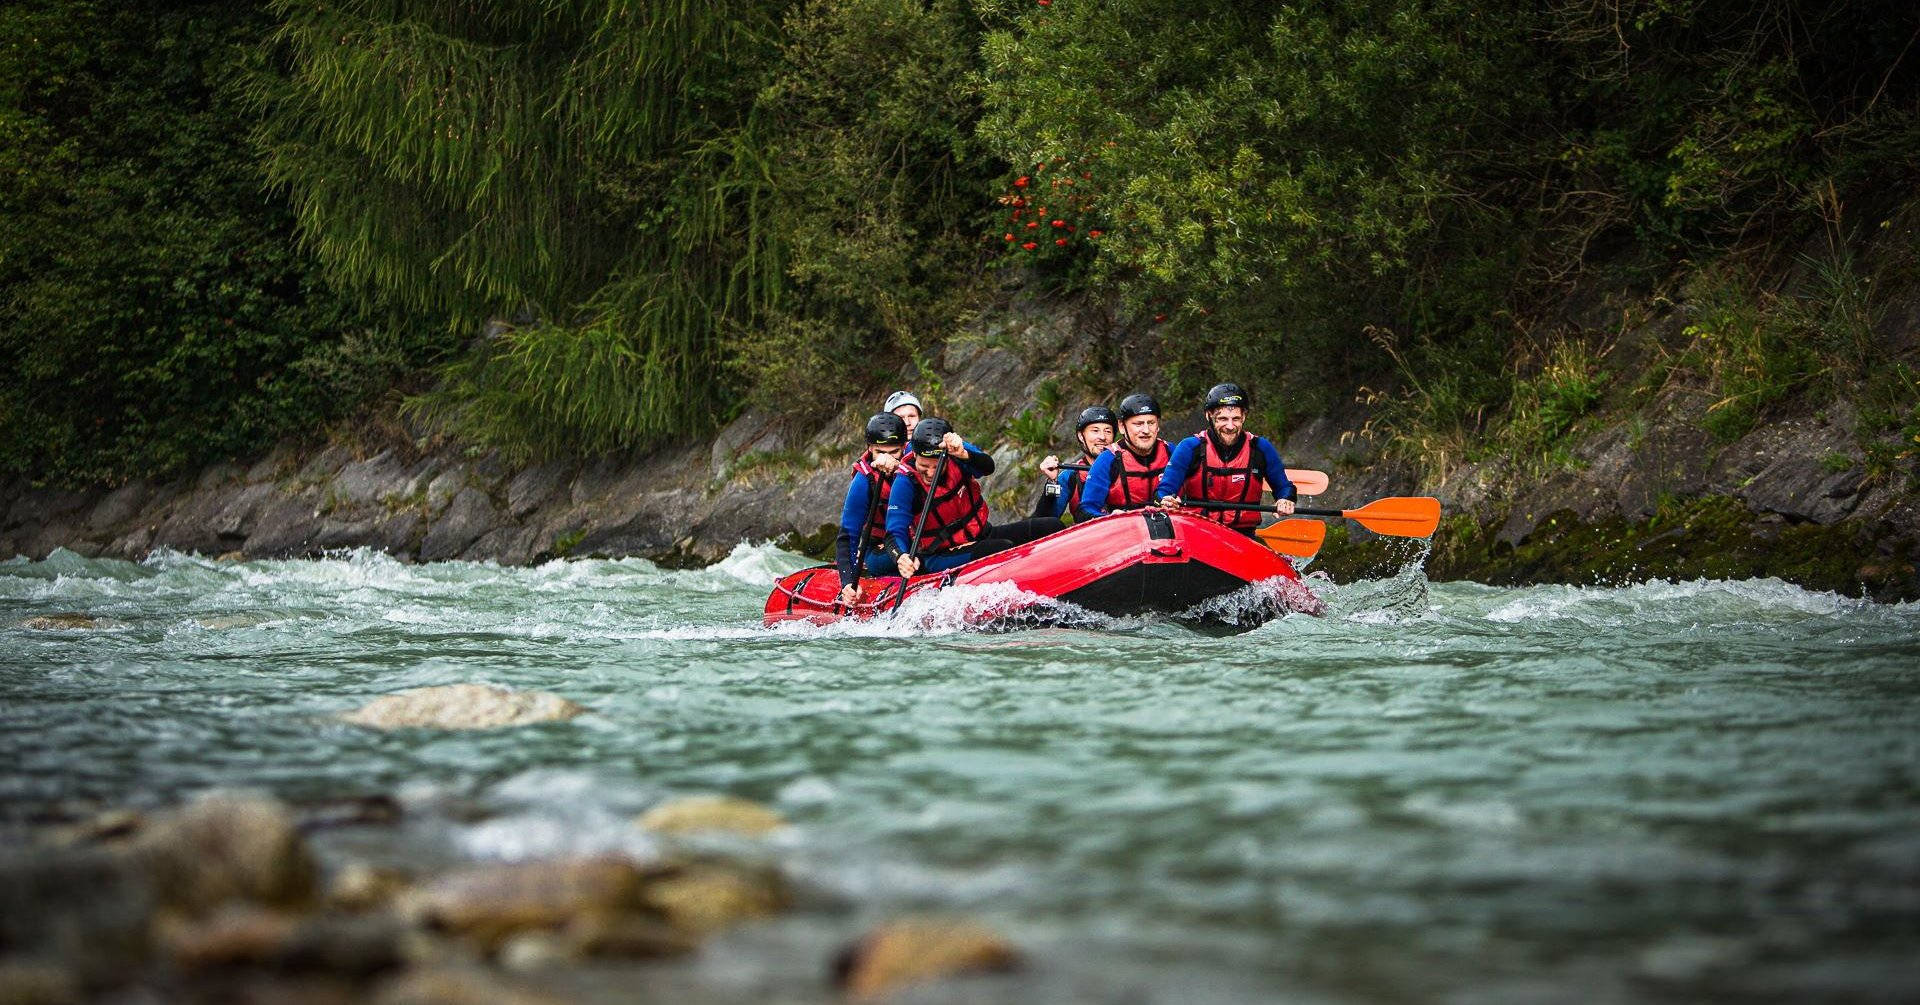 Rafting In The River Wallpaper